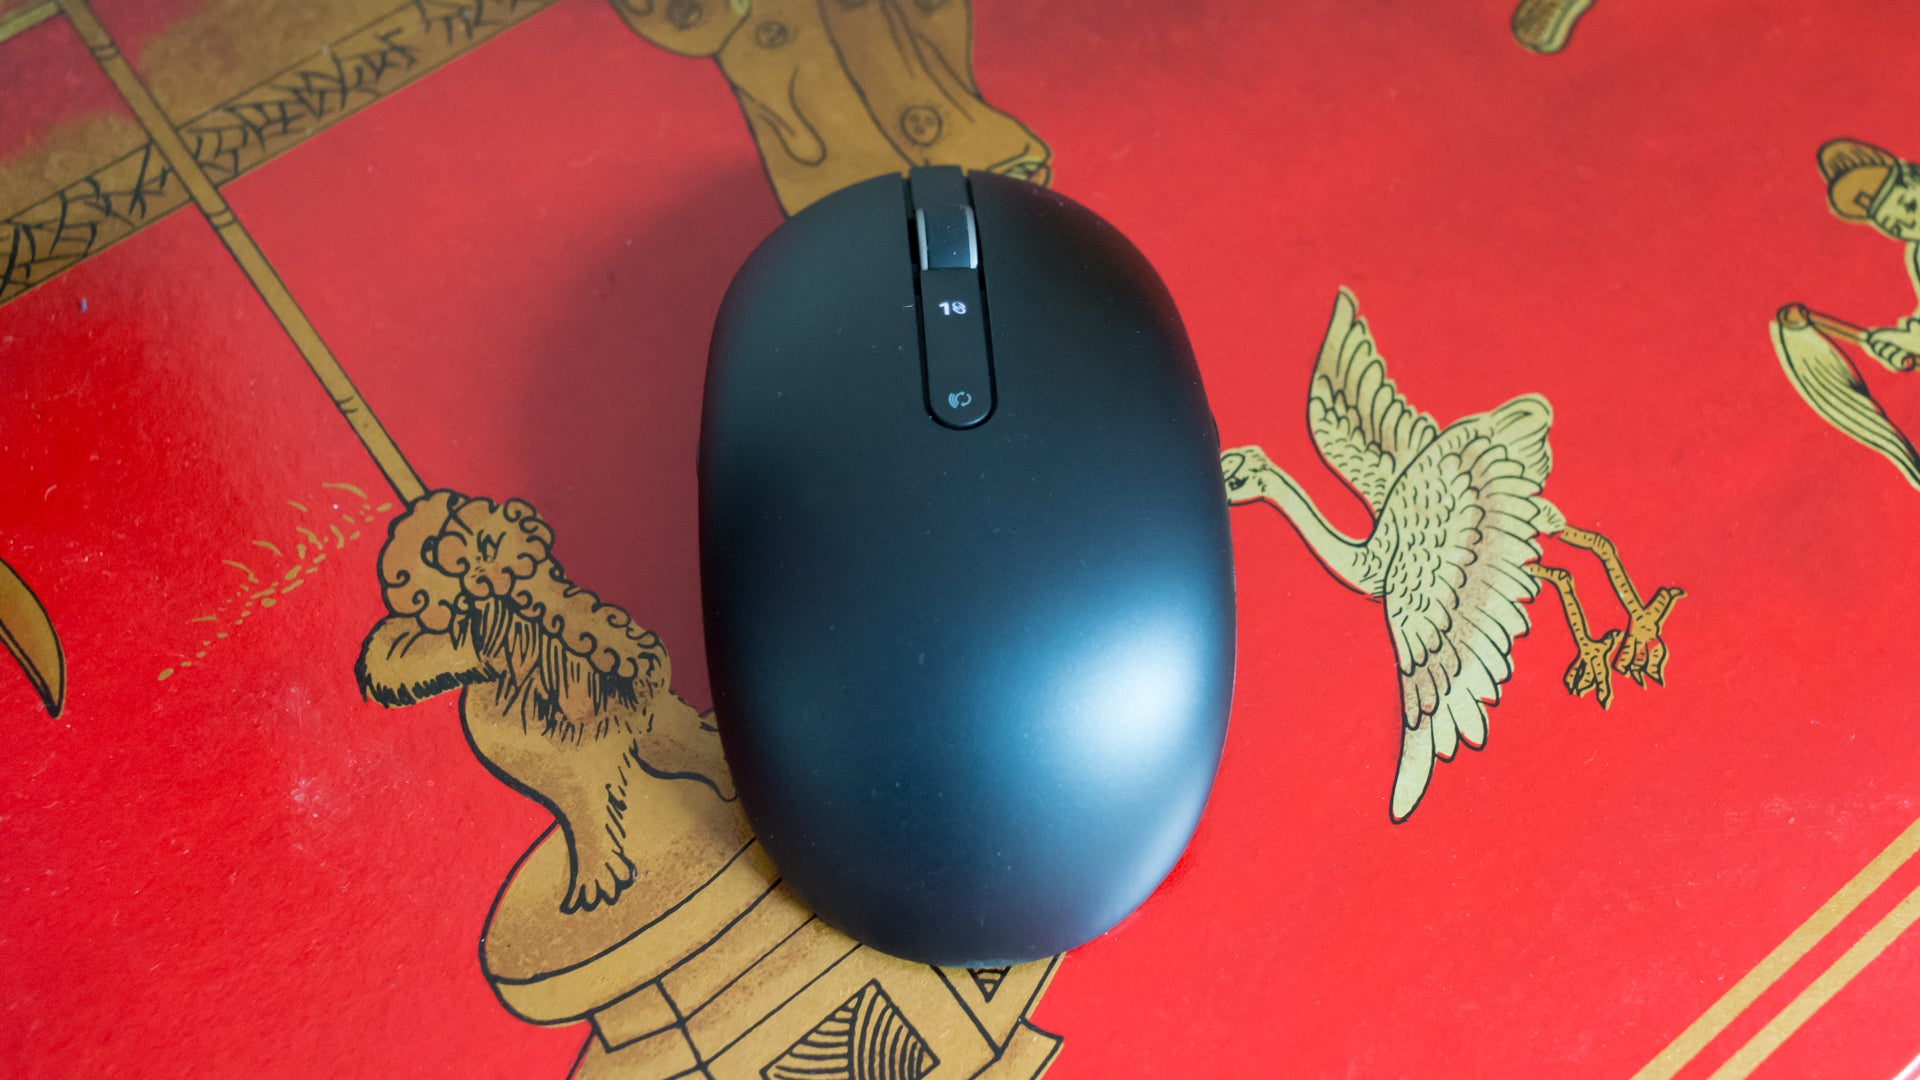 Black wireless mouse on a red patterned surface.